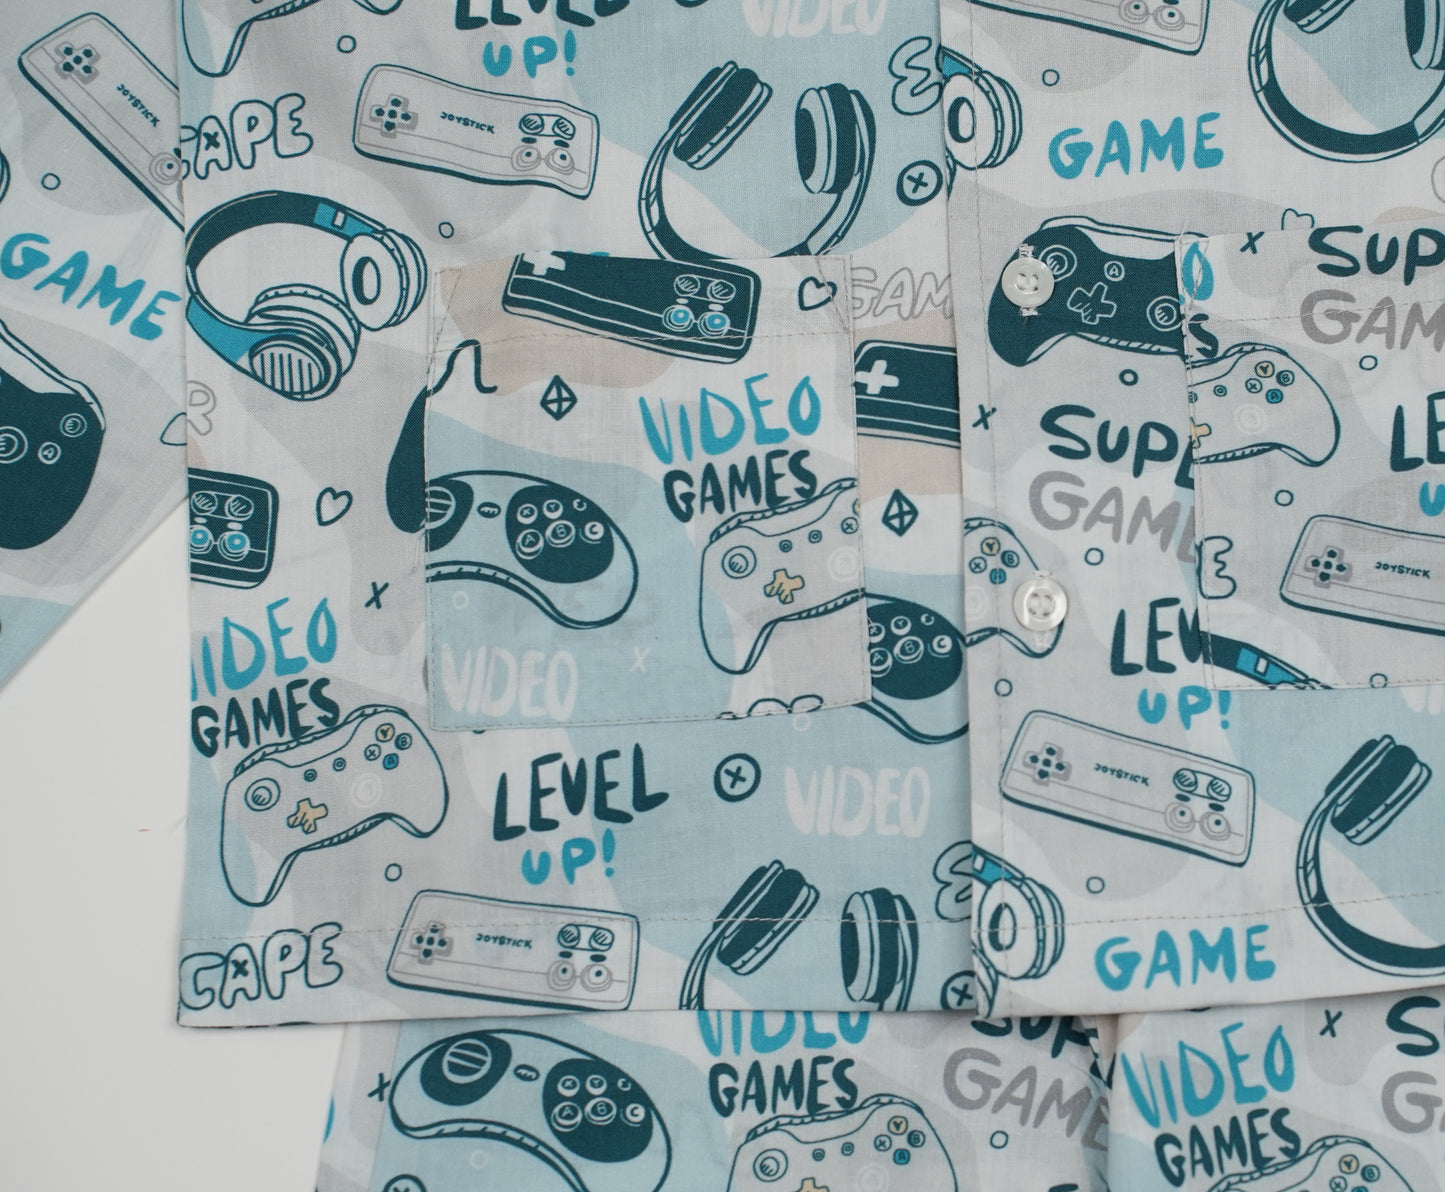 GAMERS CONTROLLERS PRINT NIGHTSUIT